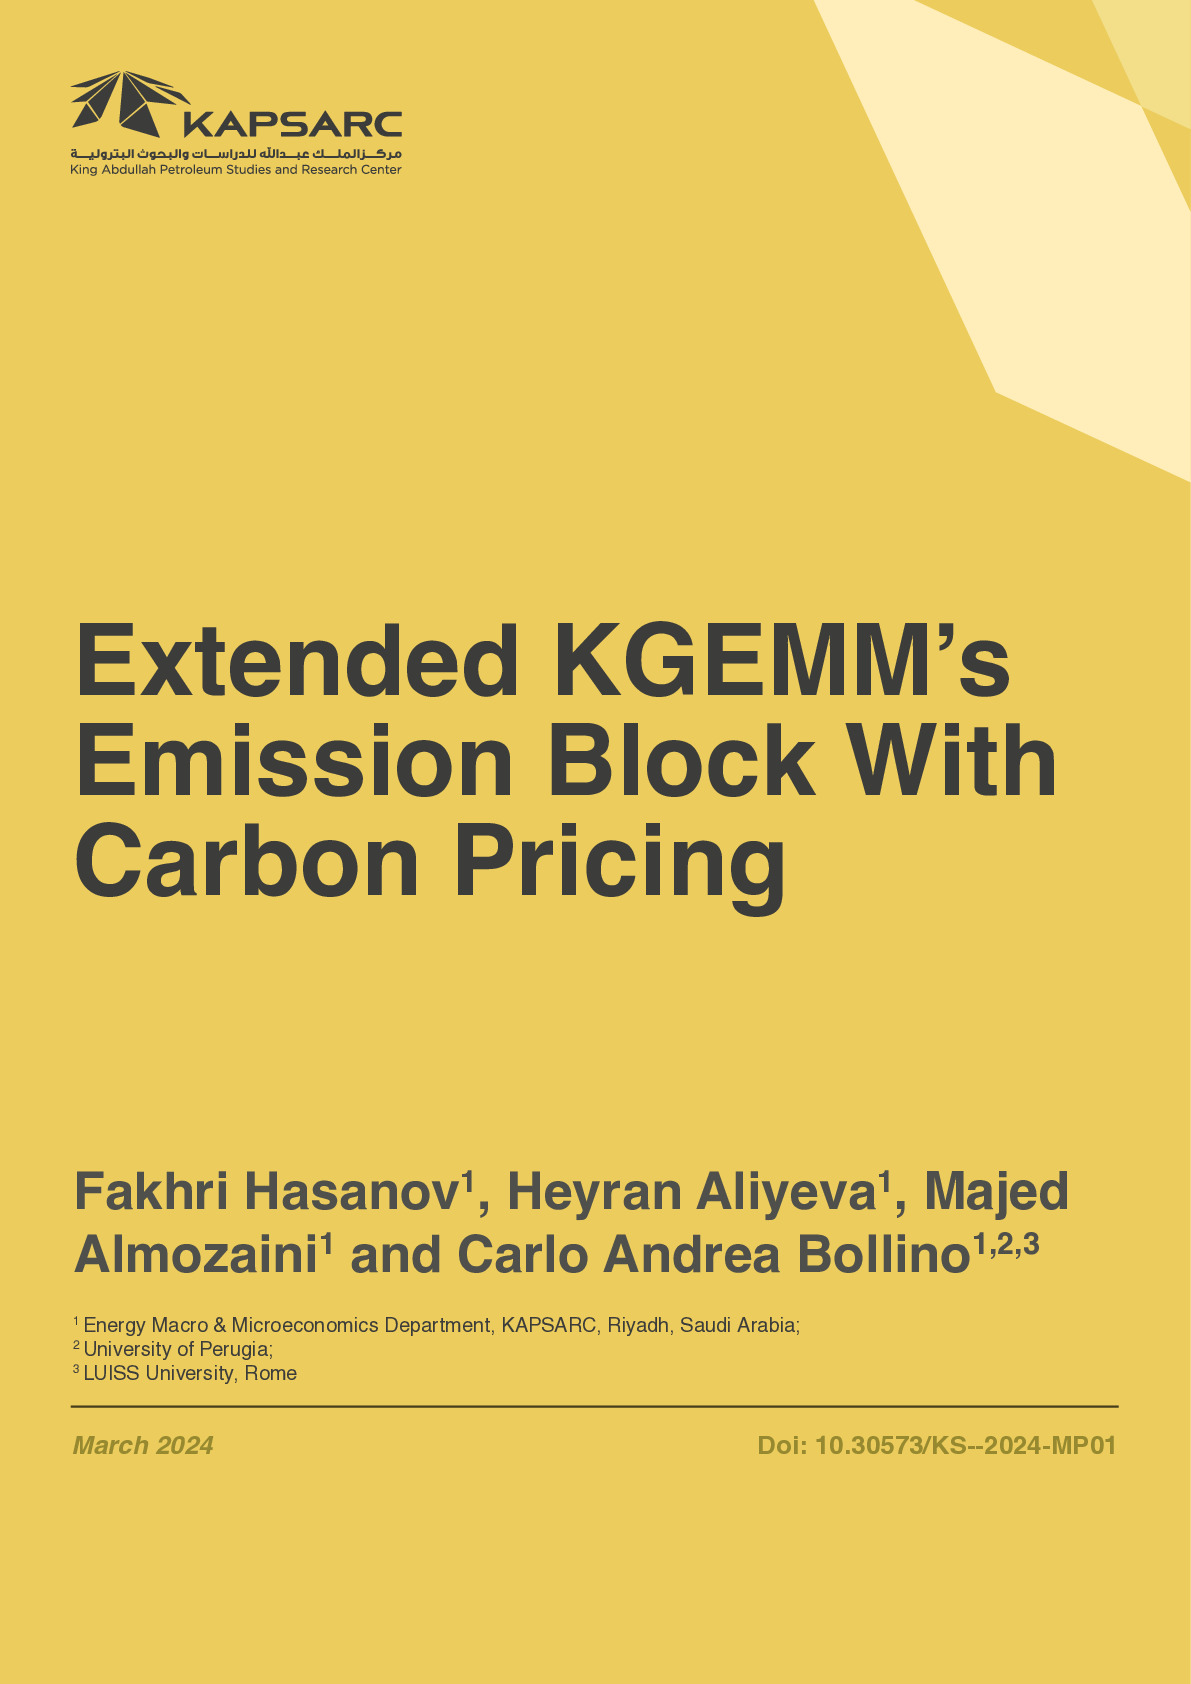 Extended KGEMM’s Emission Block With Carbon Pricing